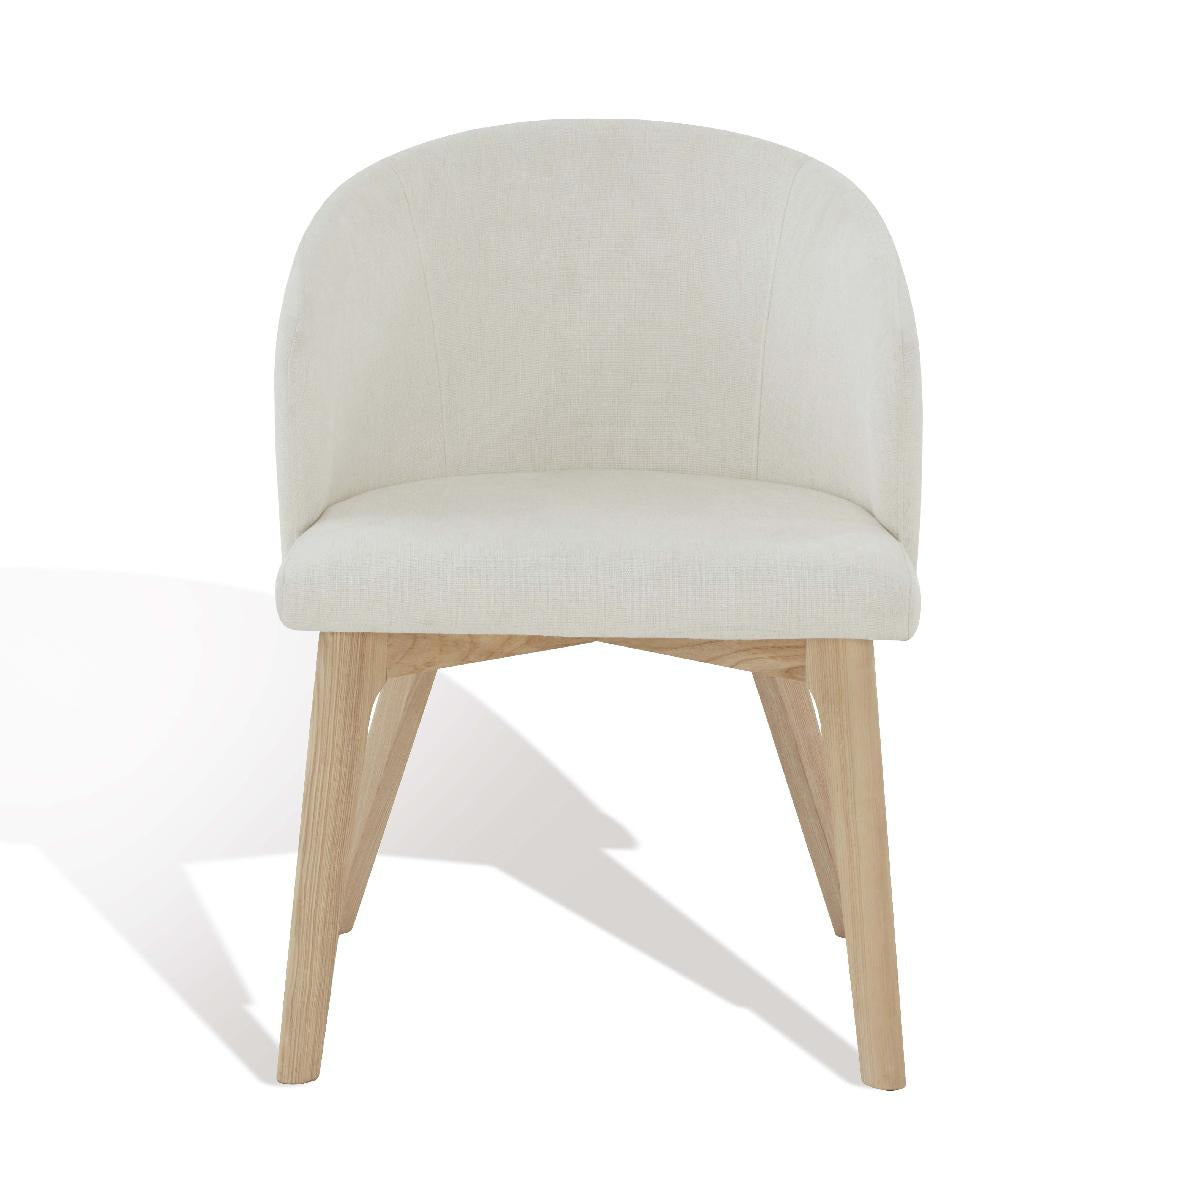 Safavieh Couture Wynonna Linen Dining Chair - Ivory / Natural